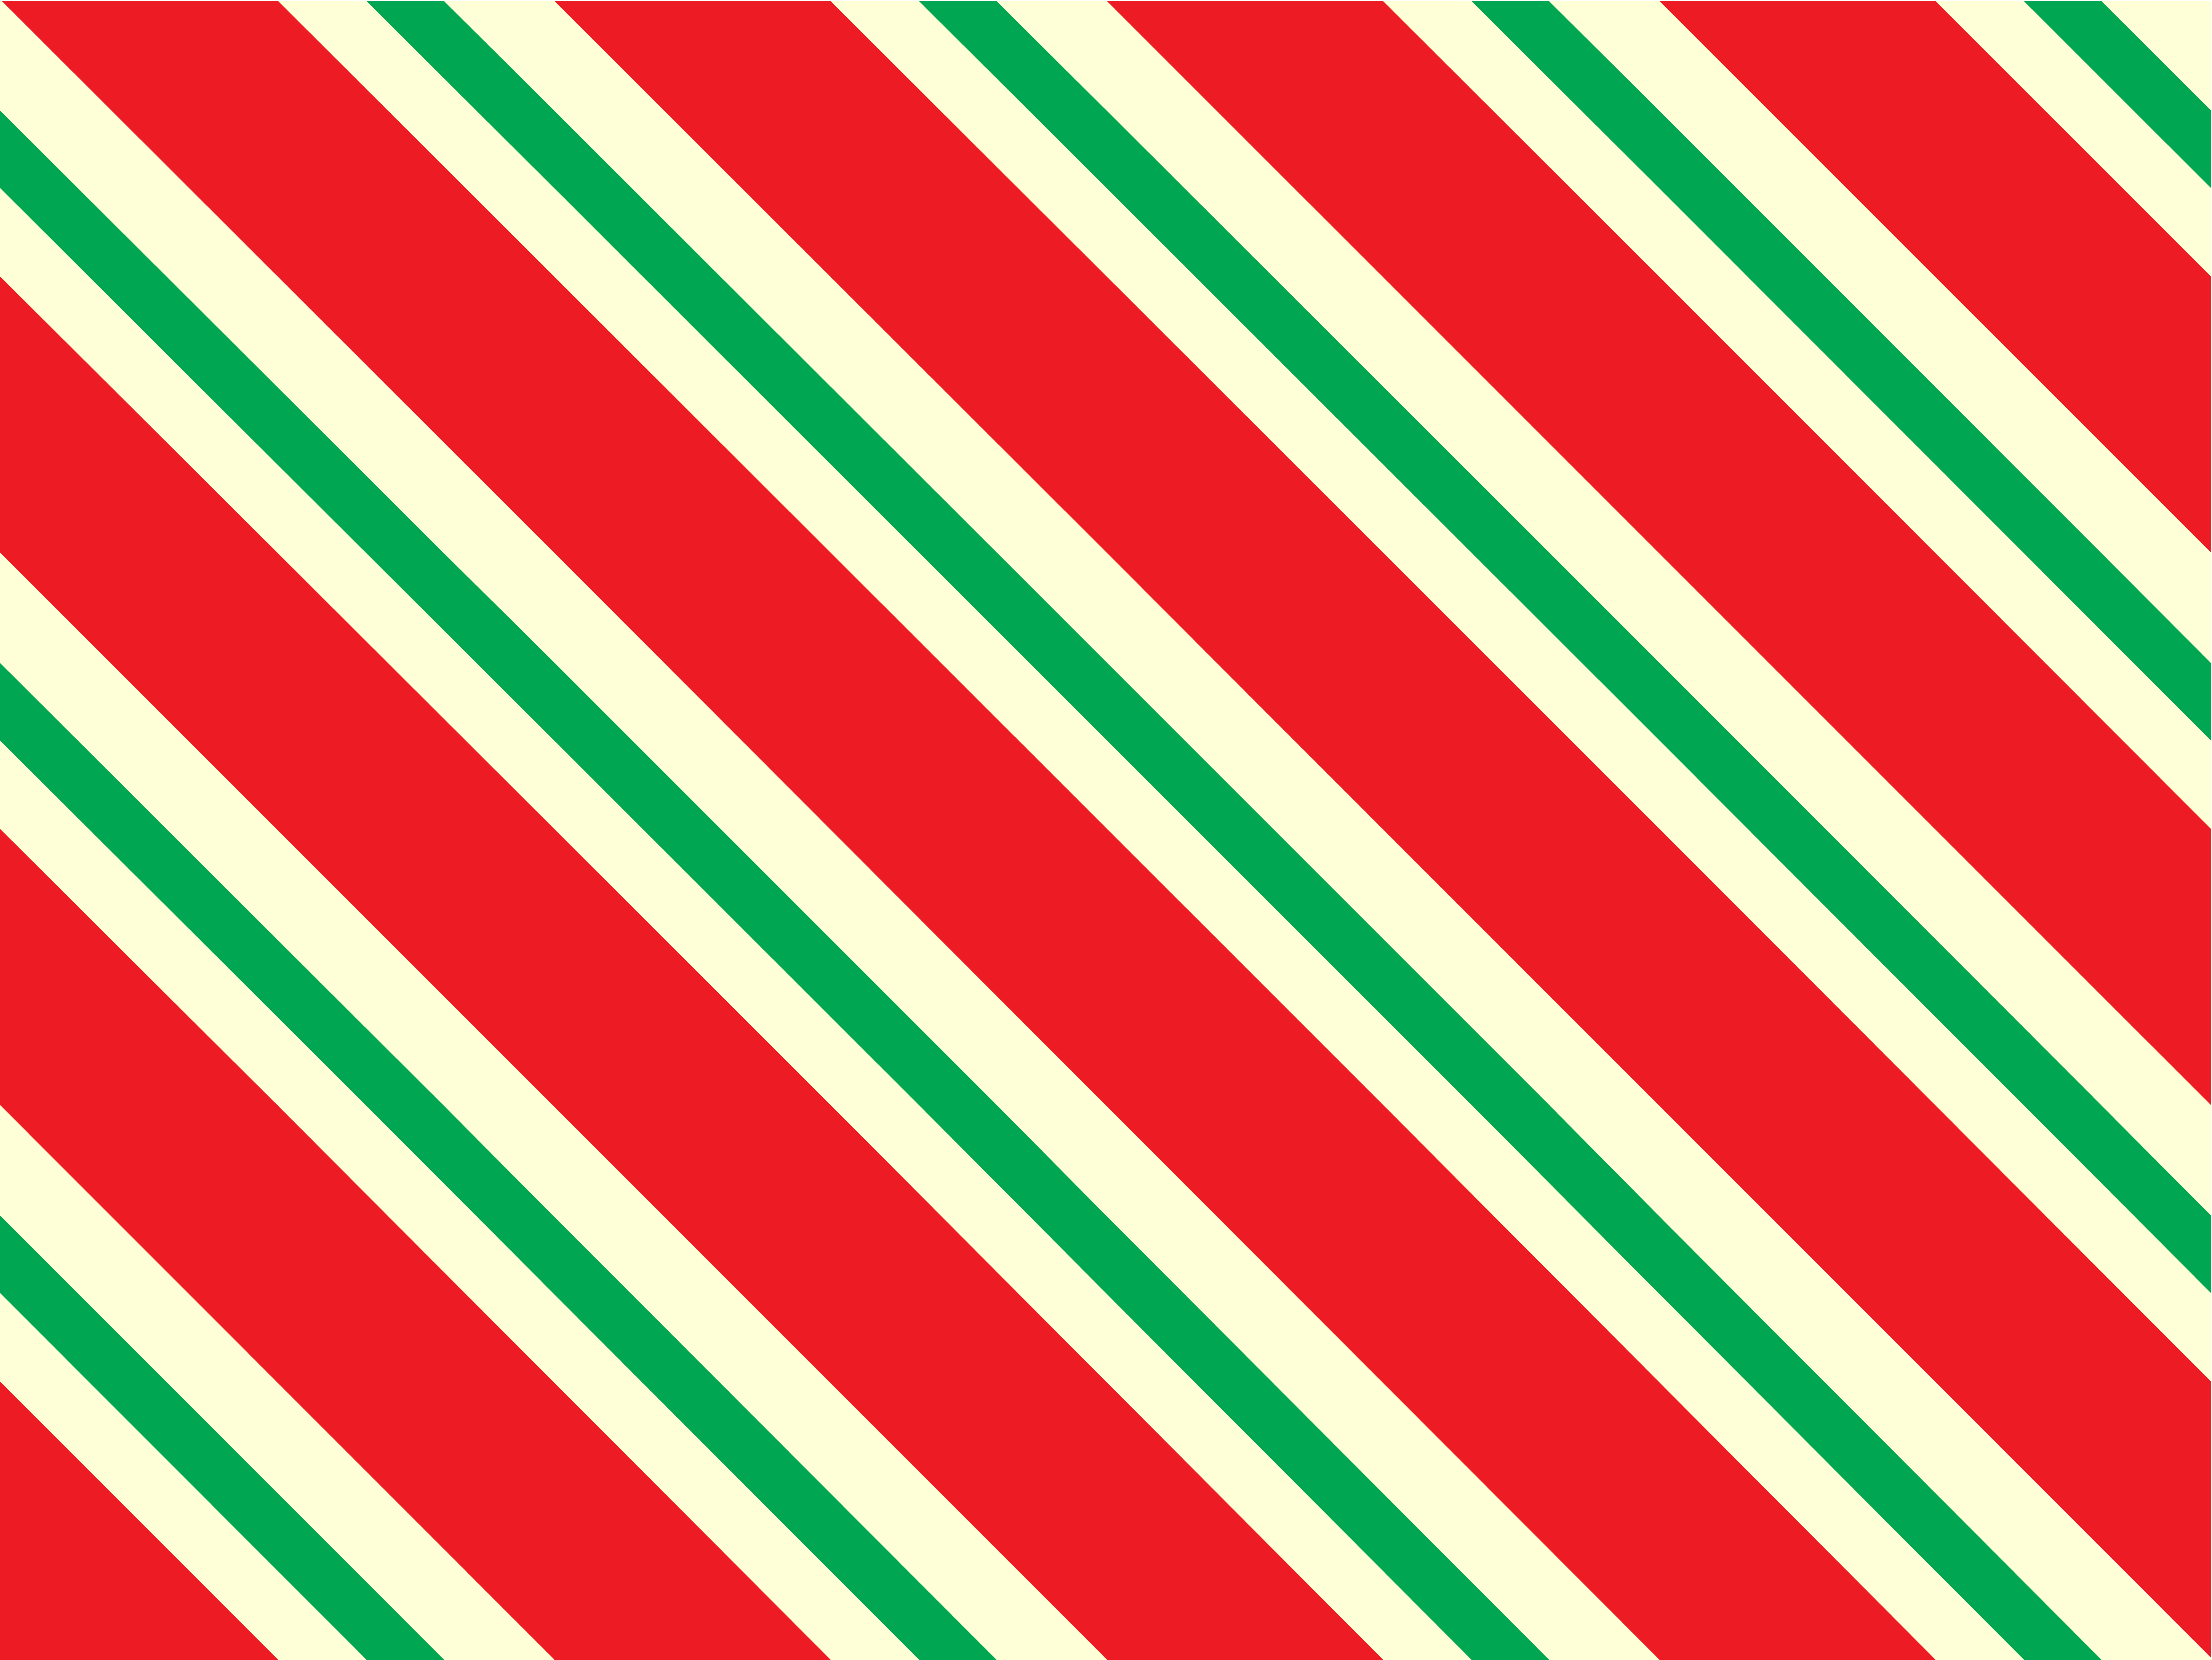 Christmas wrapping paper with Red, yellow and lime green stripes. Candy cane seamless pattern with straight diagonal lines. Vector repeating striped tile. Classic background illustration.